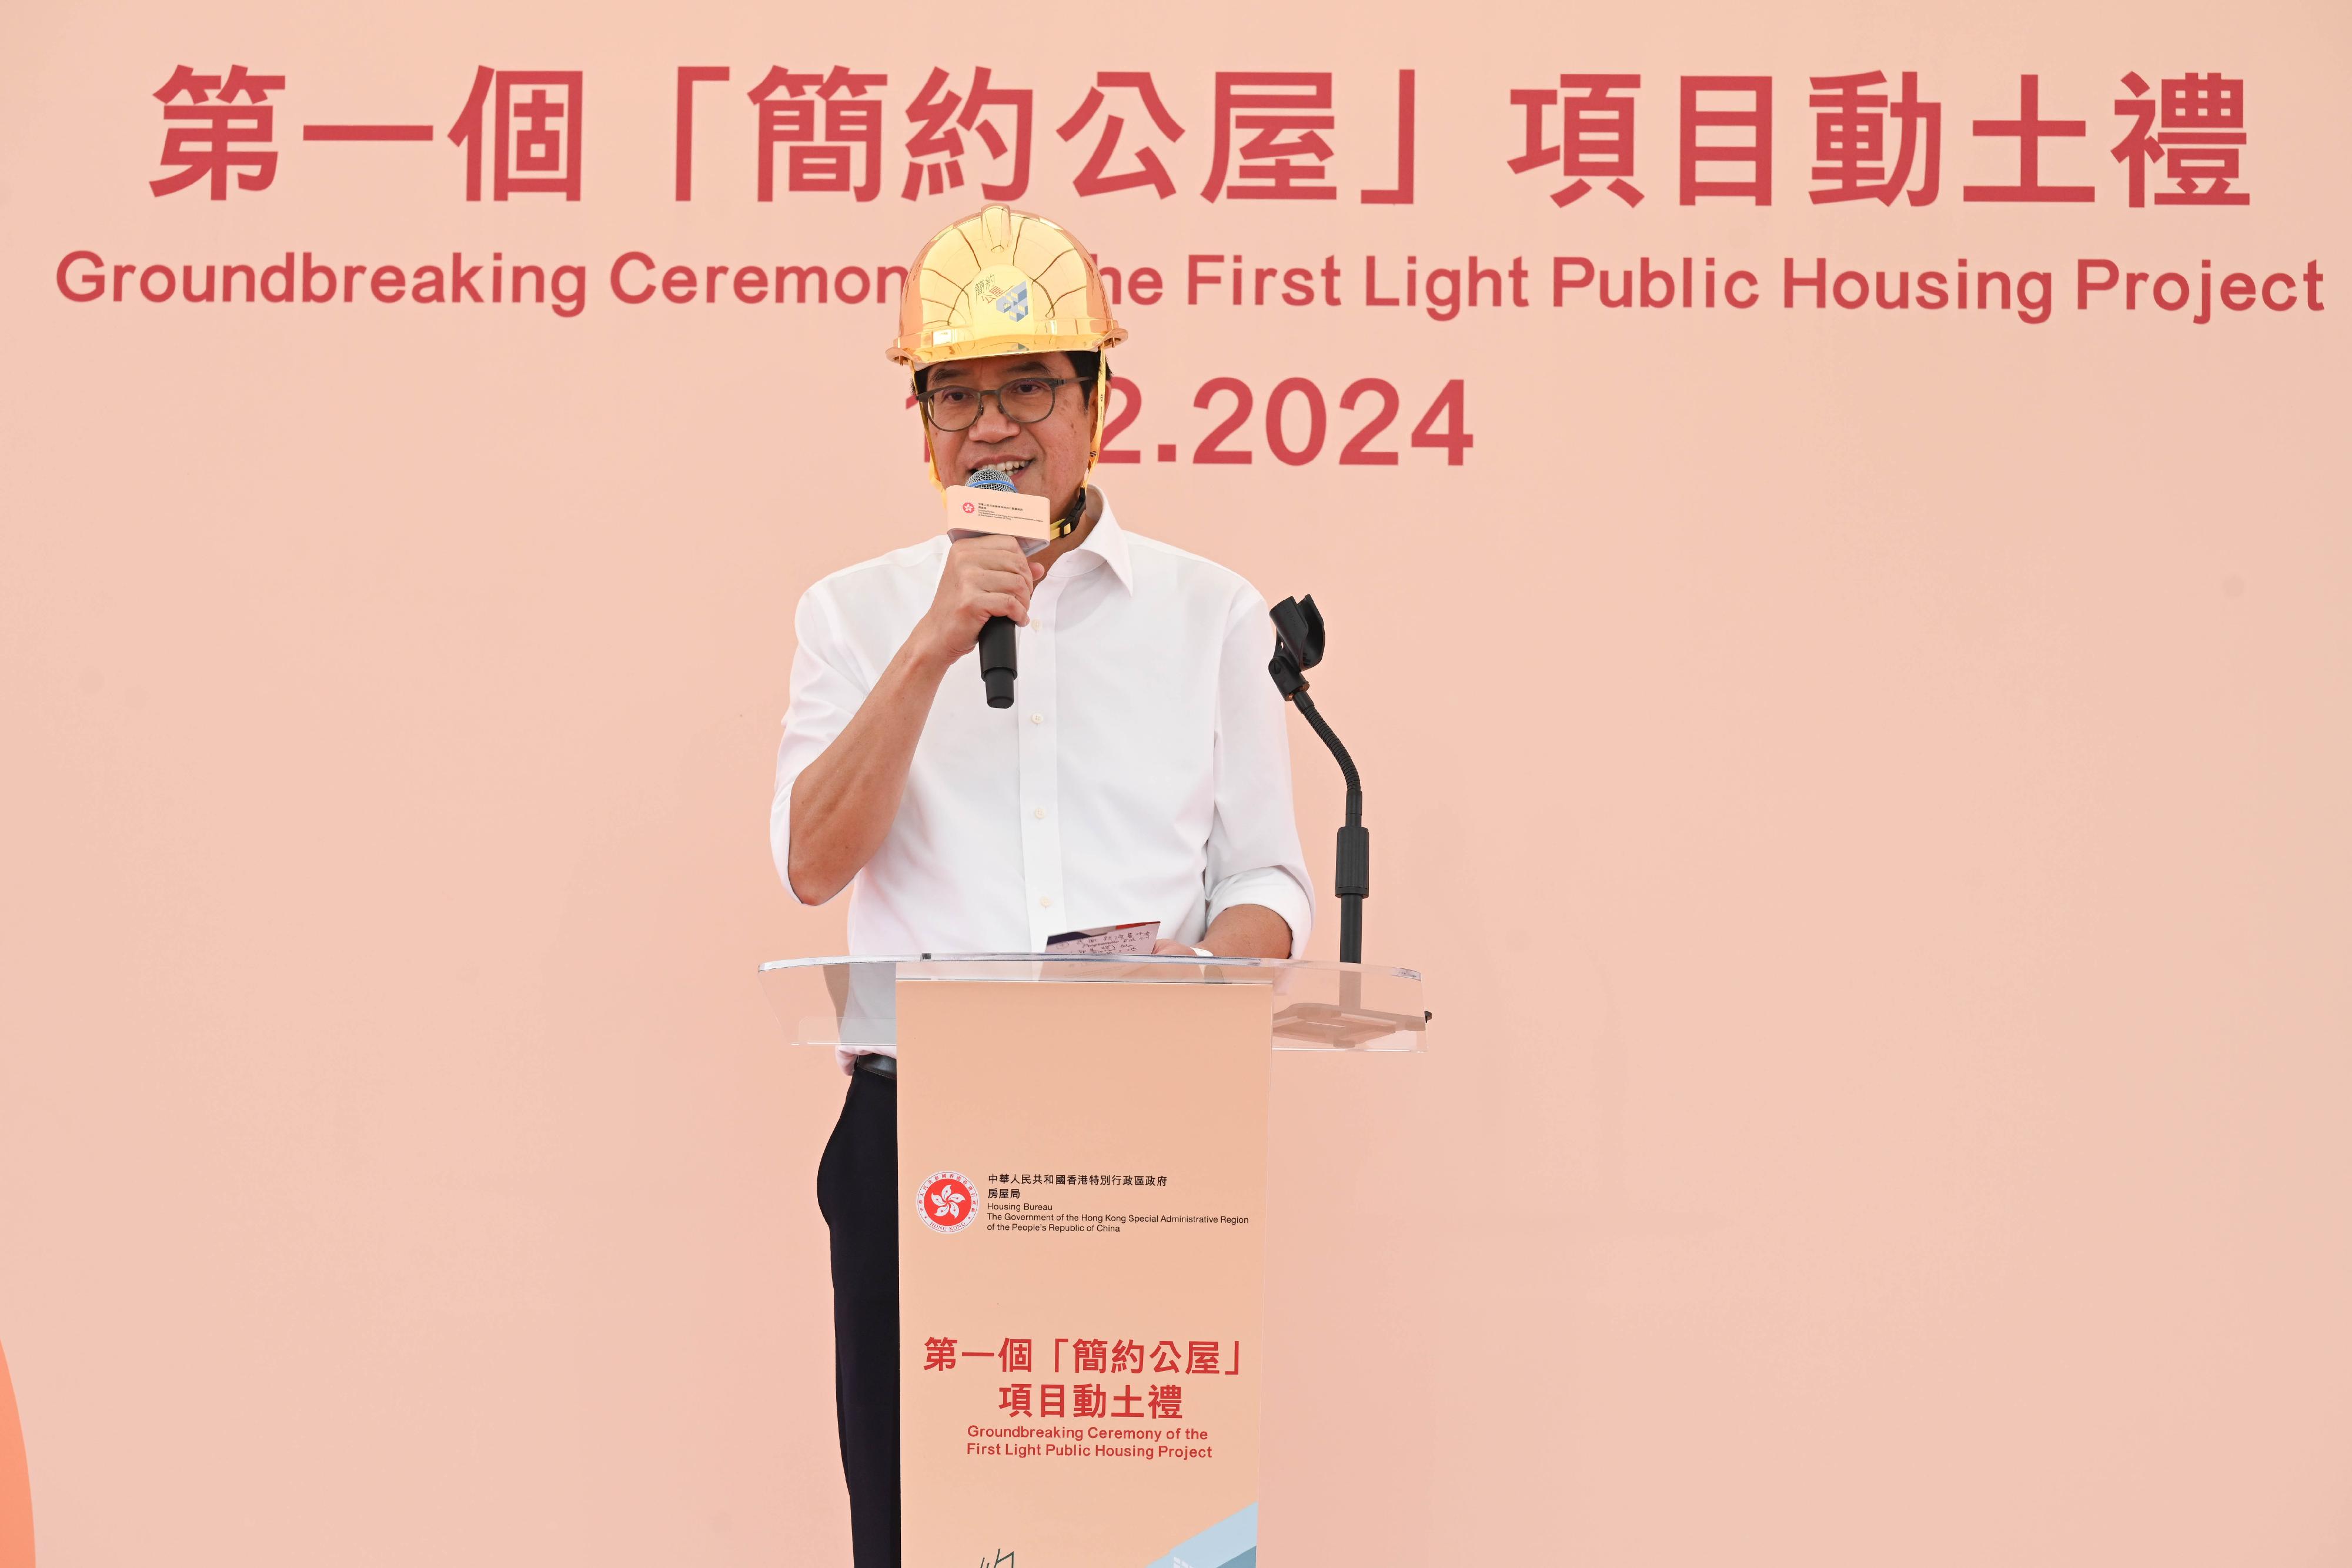 The groundbreaking ceremony for the first Light Public Housing (LPH) project was held this afternoon (February 19) at Yau Pok Road, Yuen Long, showcasing the determination and execution capability of the Government in addressing the housing problem. Photo shows the Deputy Financial Secretary, Mr Michael Wong, delivering a speech at the groundbreaking ceremony.